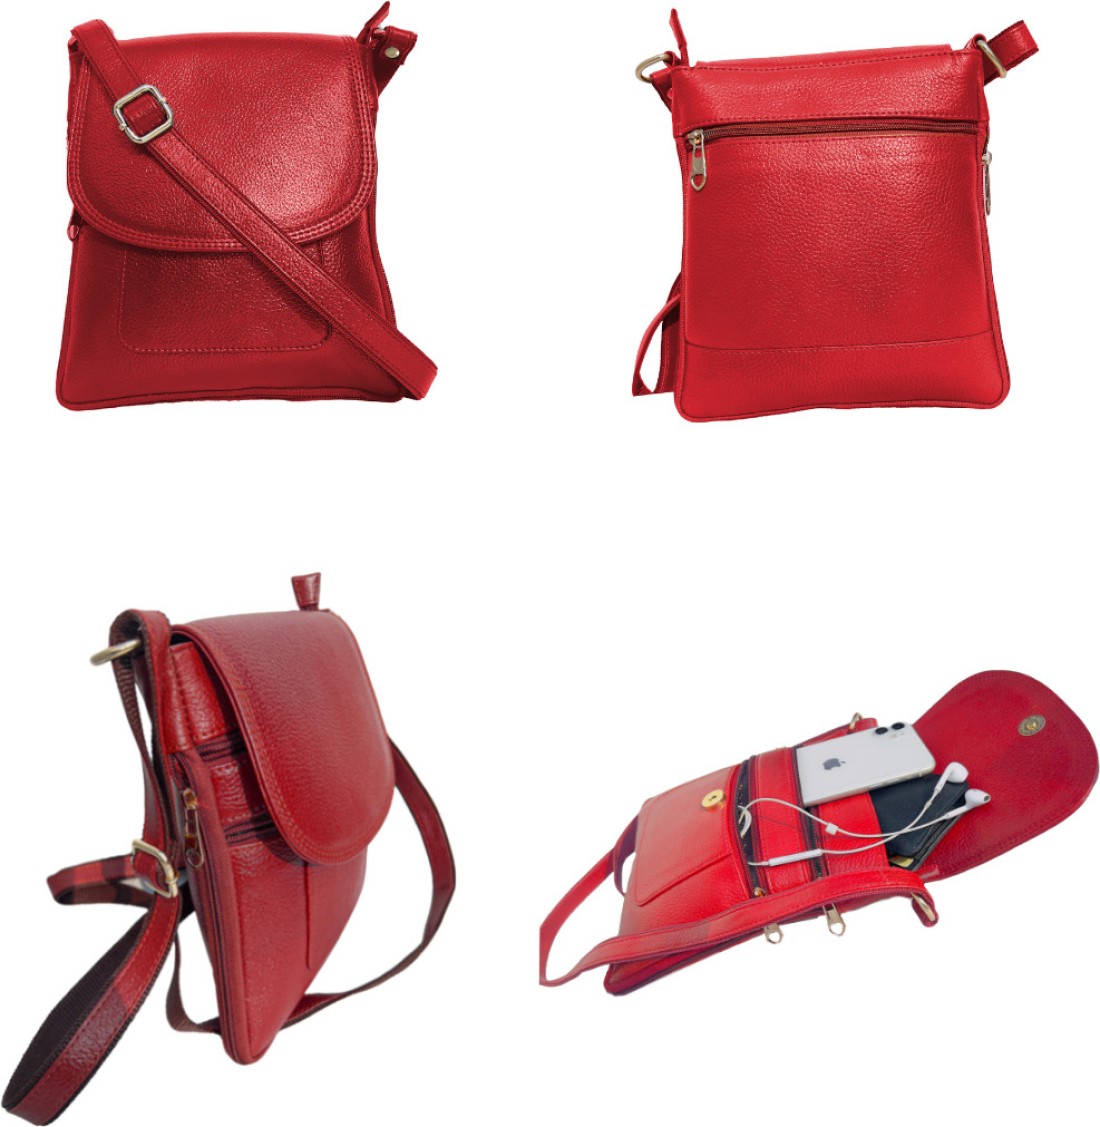 Amiro Red Sling Bag bag01 red - Price in India